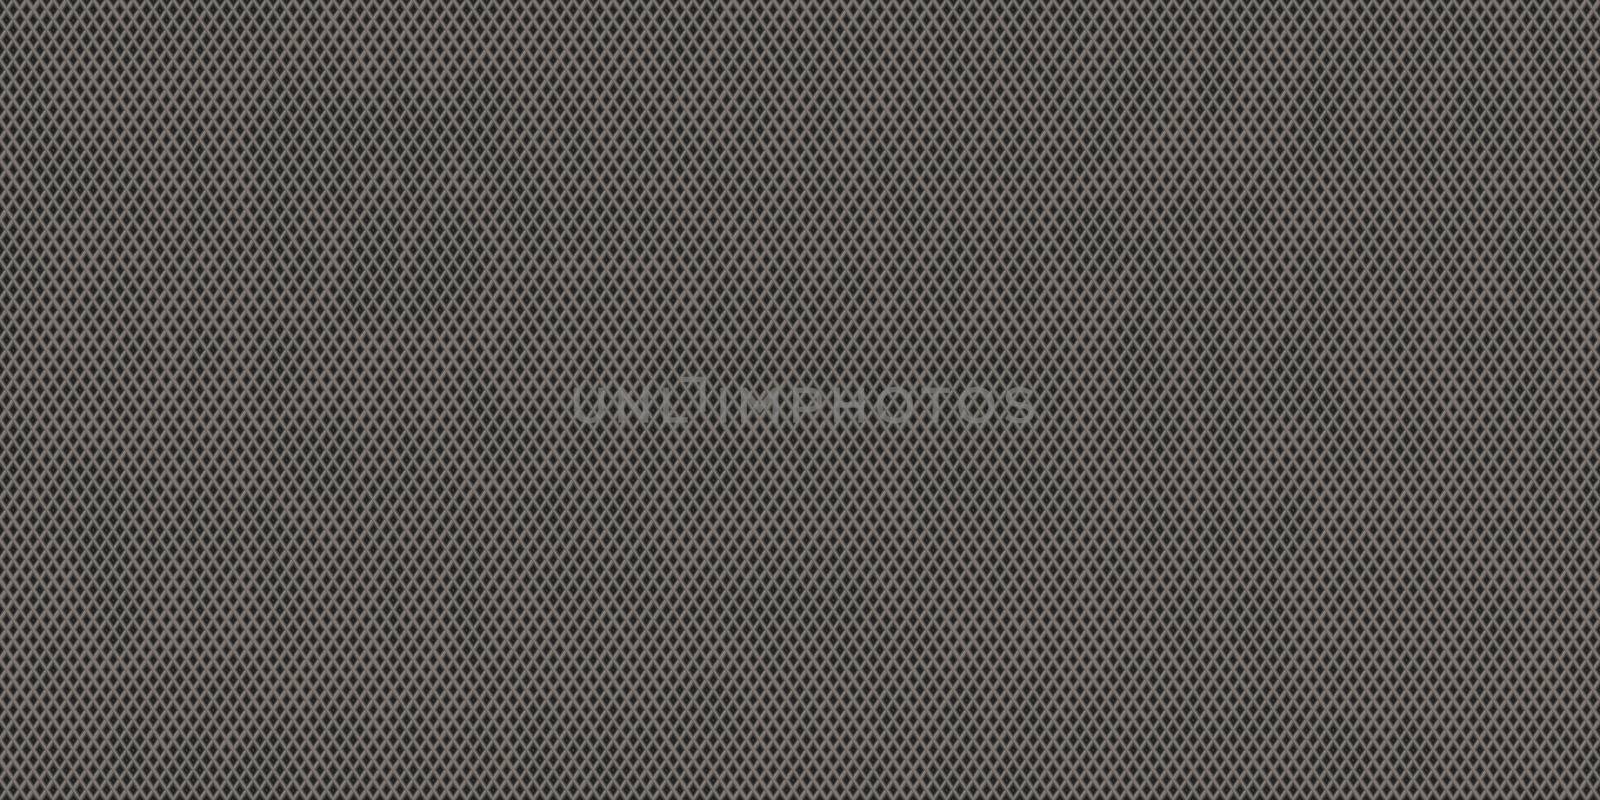 Knurling touch texture. Knurl contact surface background. Metal rhombus pattern surface.